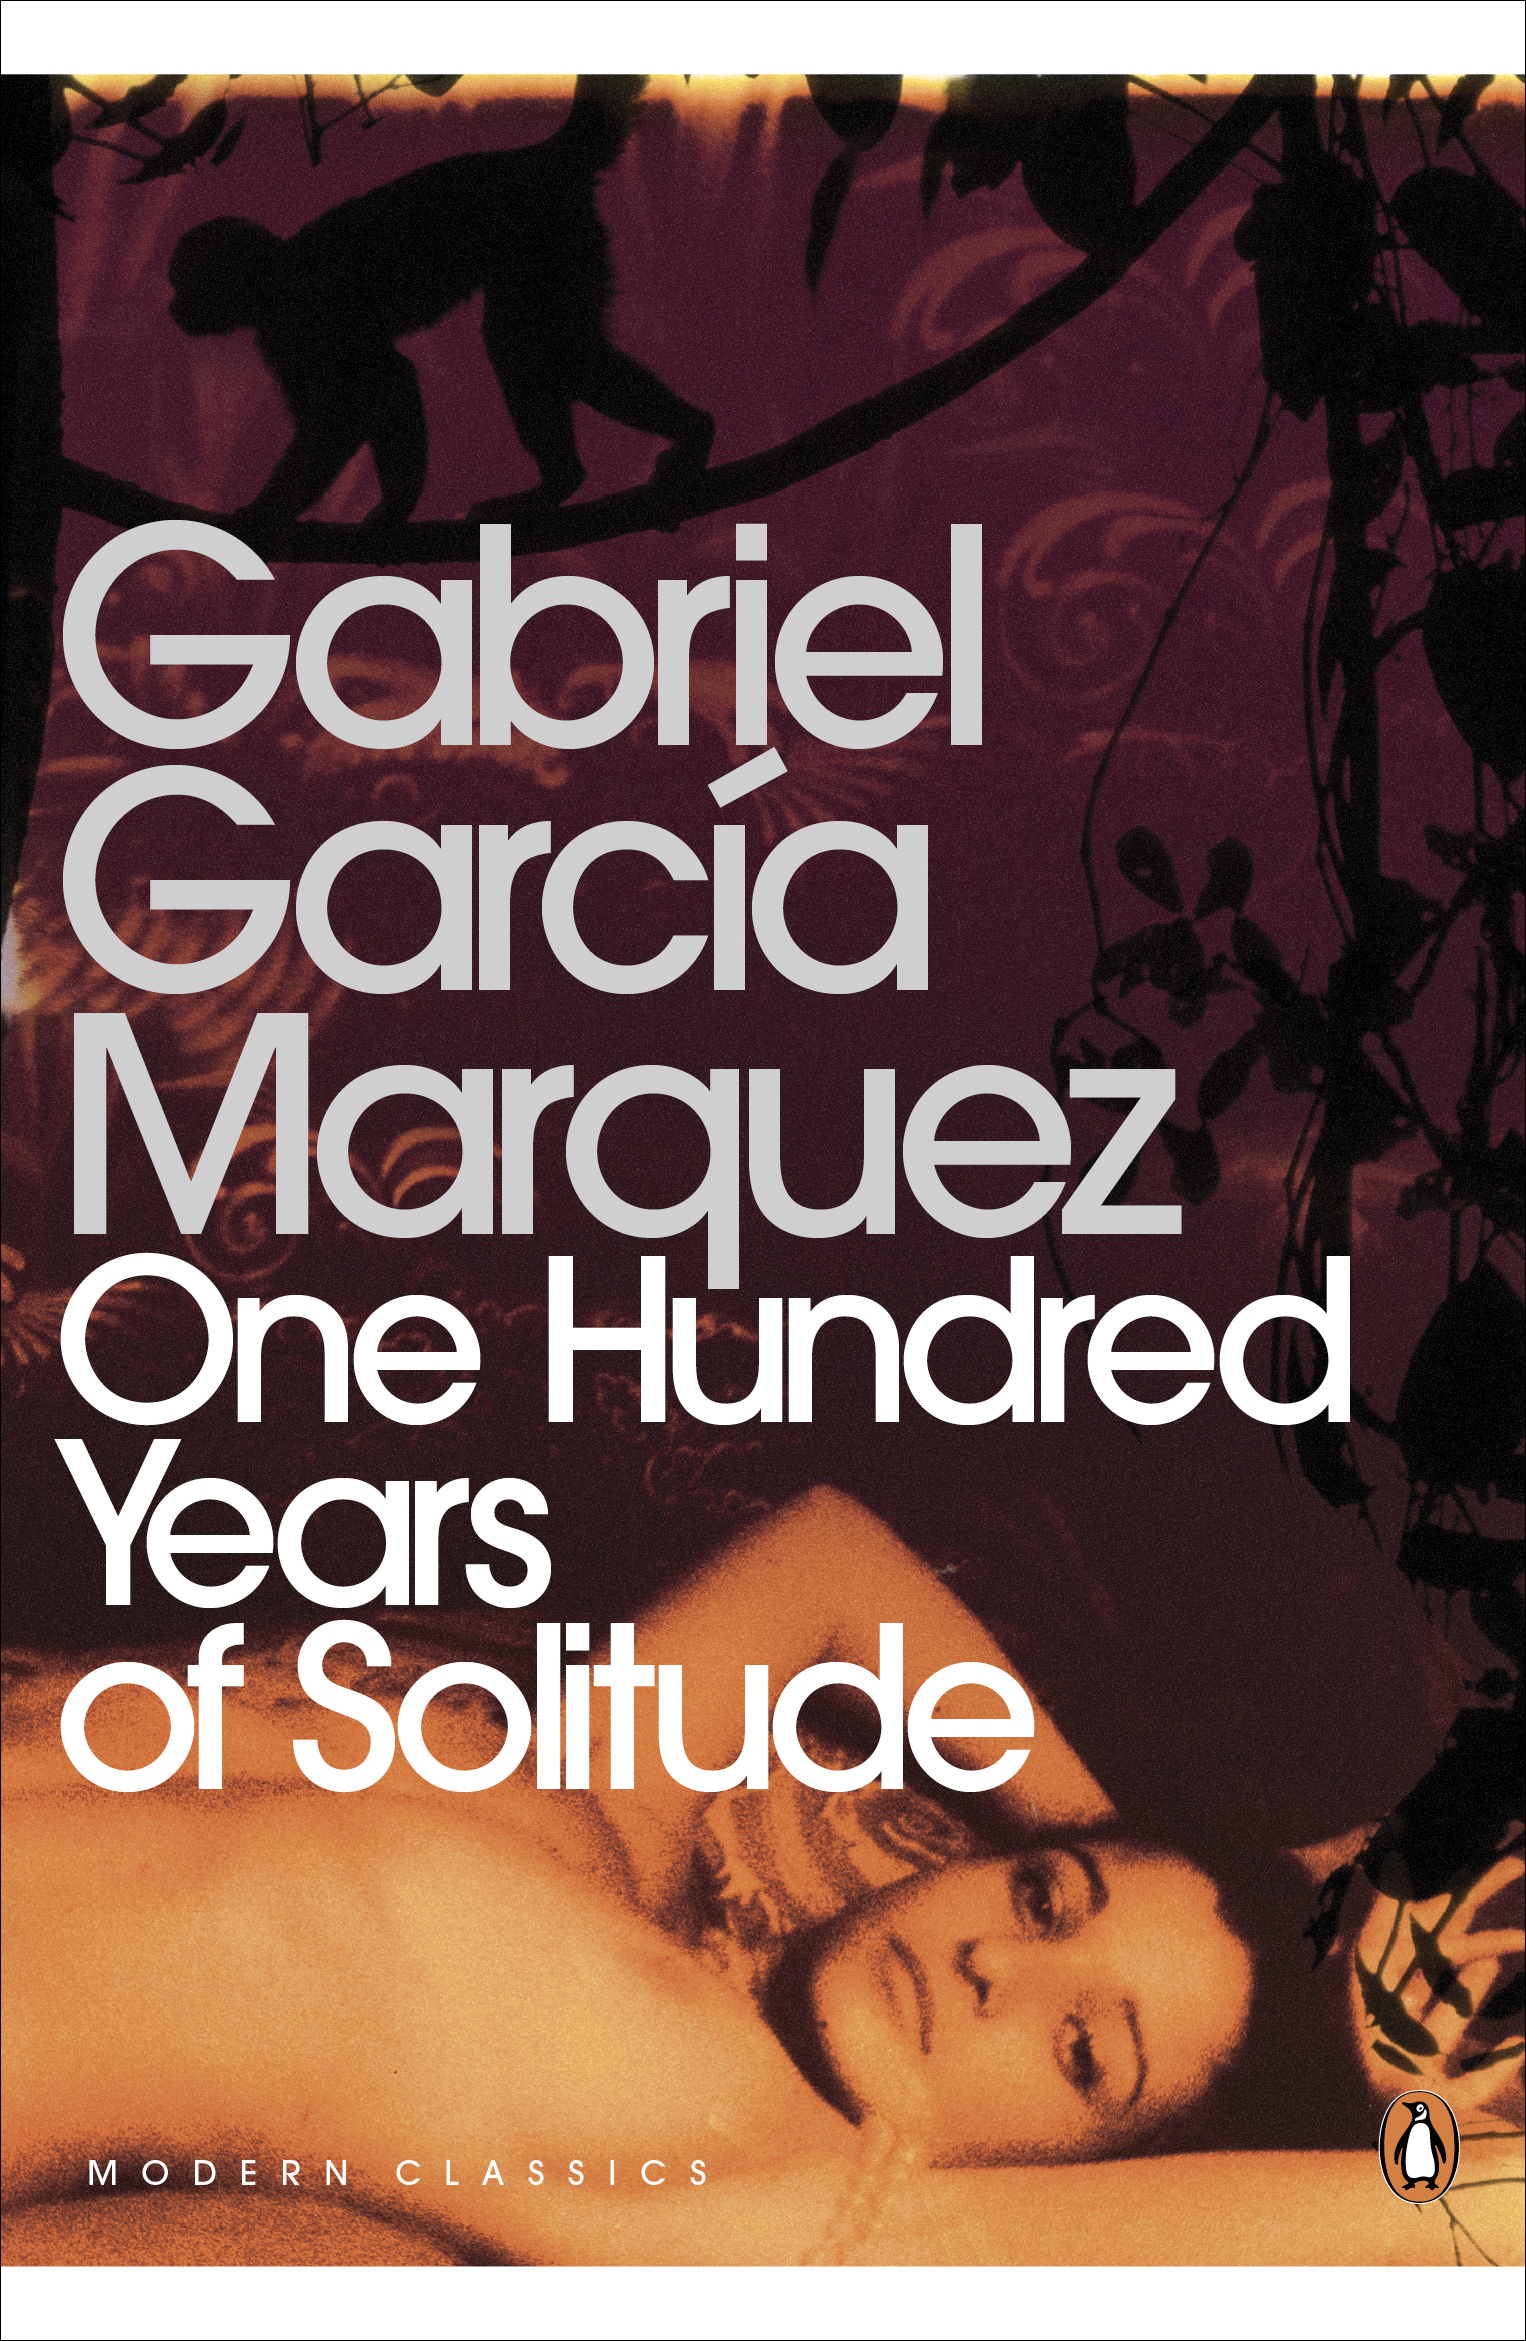 One Hundred Years Of Solitude - Gabriel Garcia Marquez - One Hundred Years Of Solitude Time